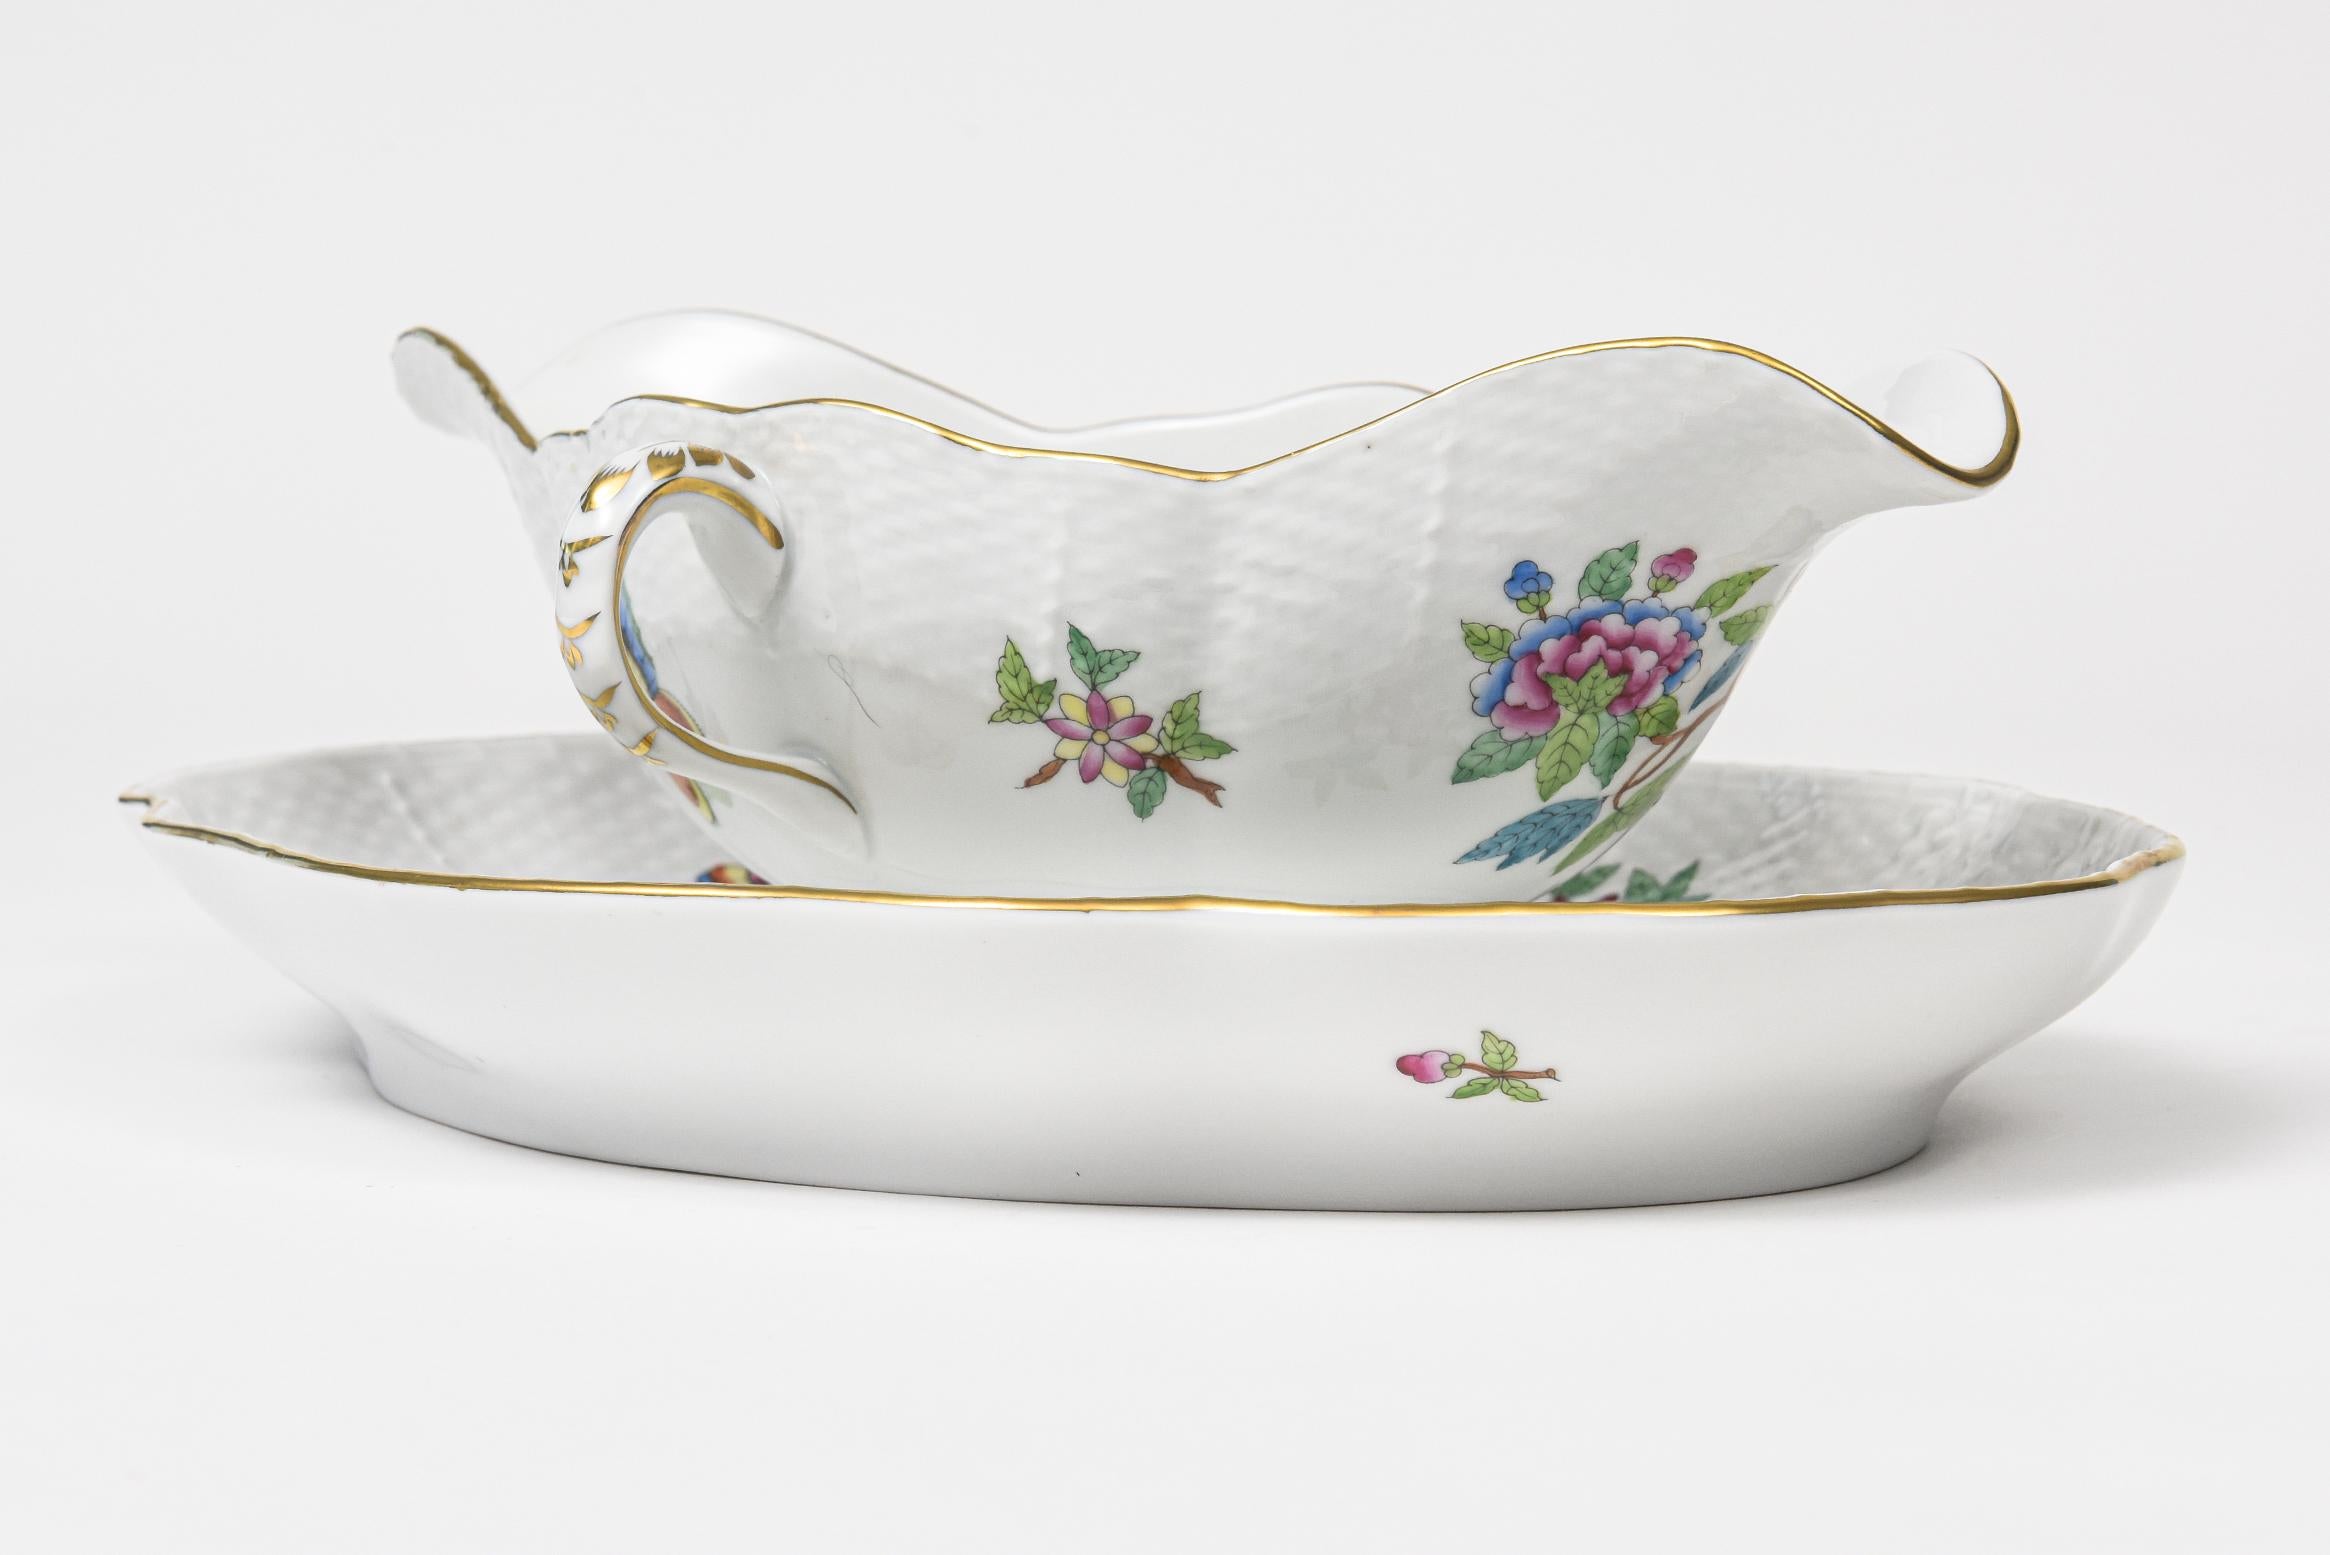 Herend Queen Victoria Open Sauce Gravy Boat with Attached Underplate 1